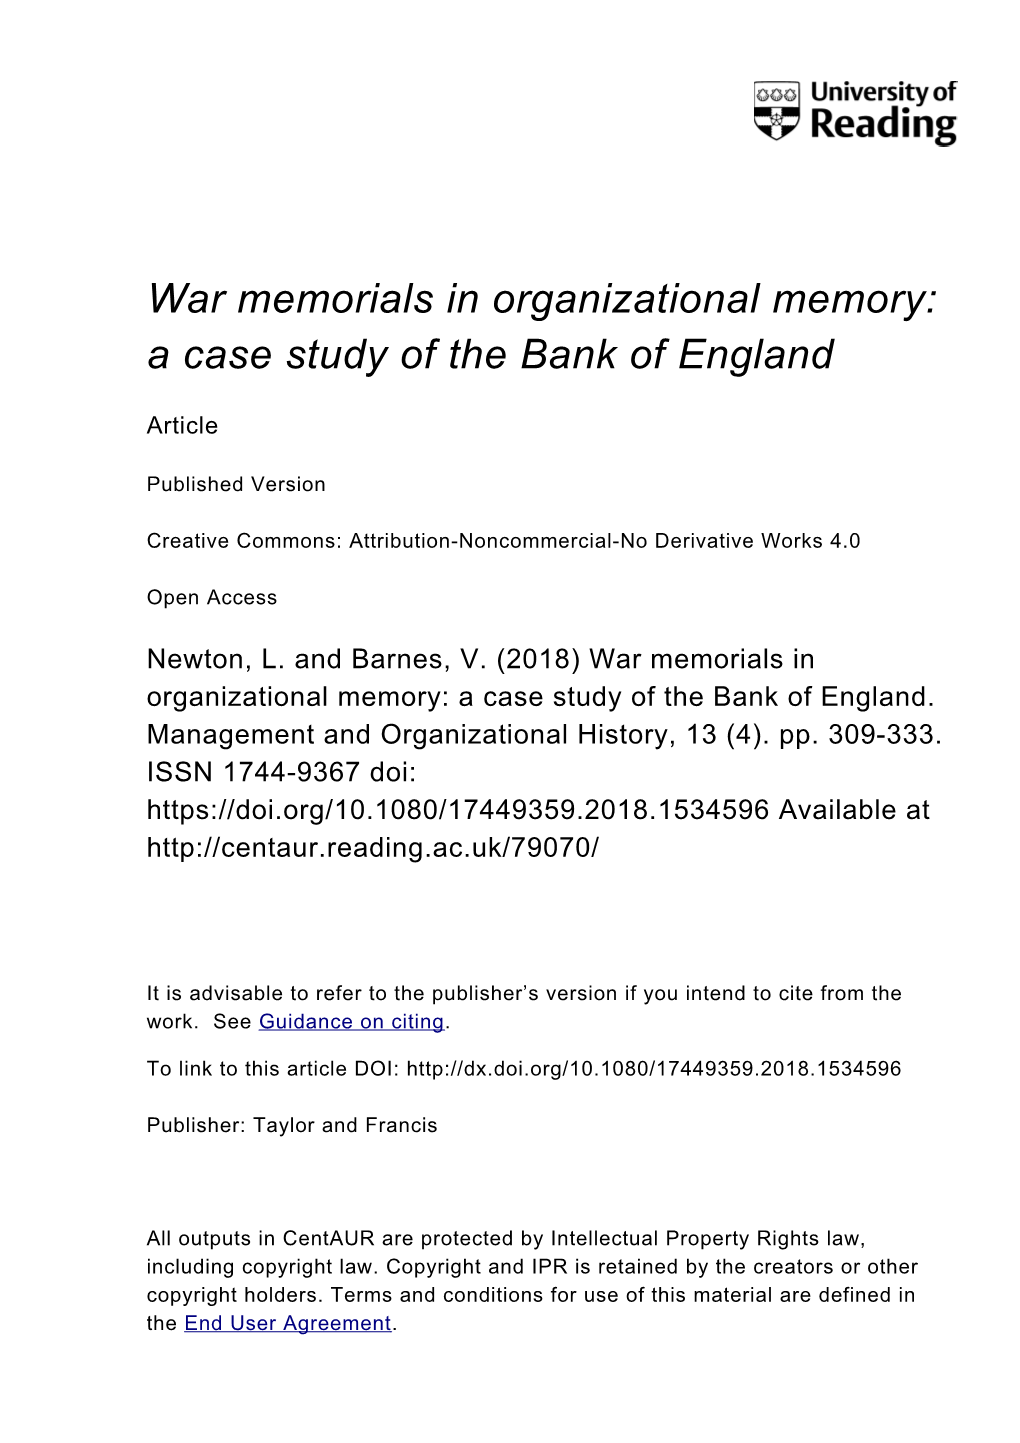 War Memorials in Organizational Memory: a Case Study of the Bank of England